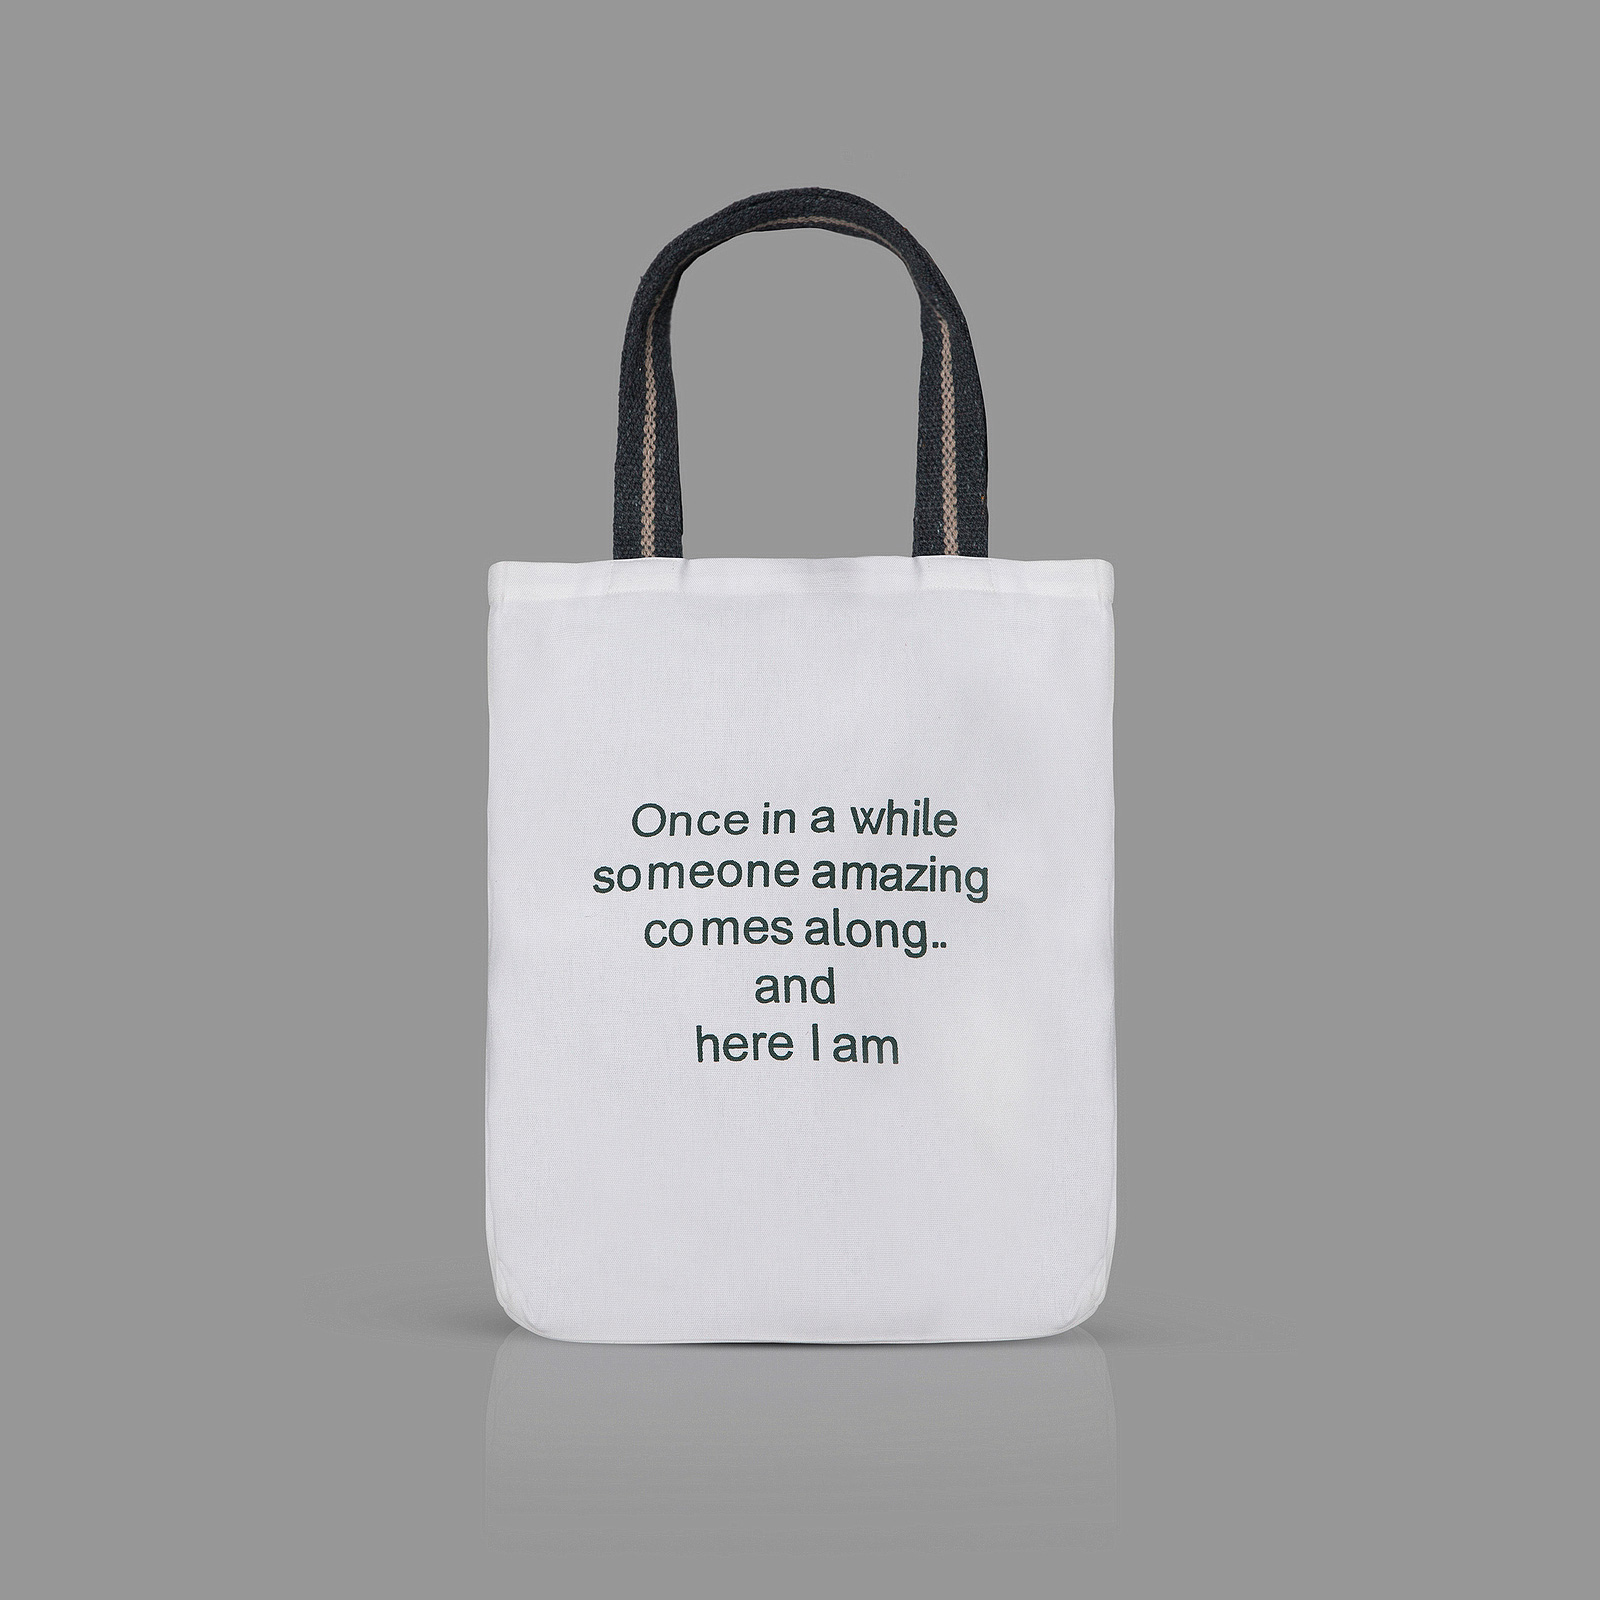 H:\AA-Clients\Tee-Tote-Ler\Products\ORI\04 Gift Bags\01 Quotation Totes-plain background-tall